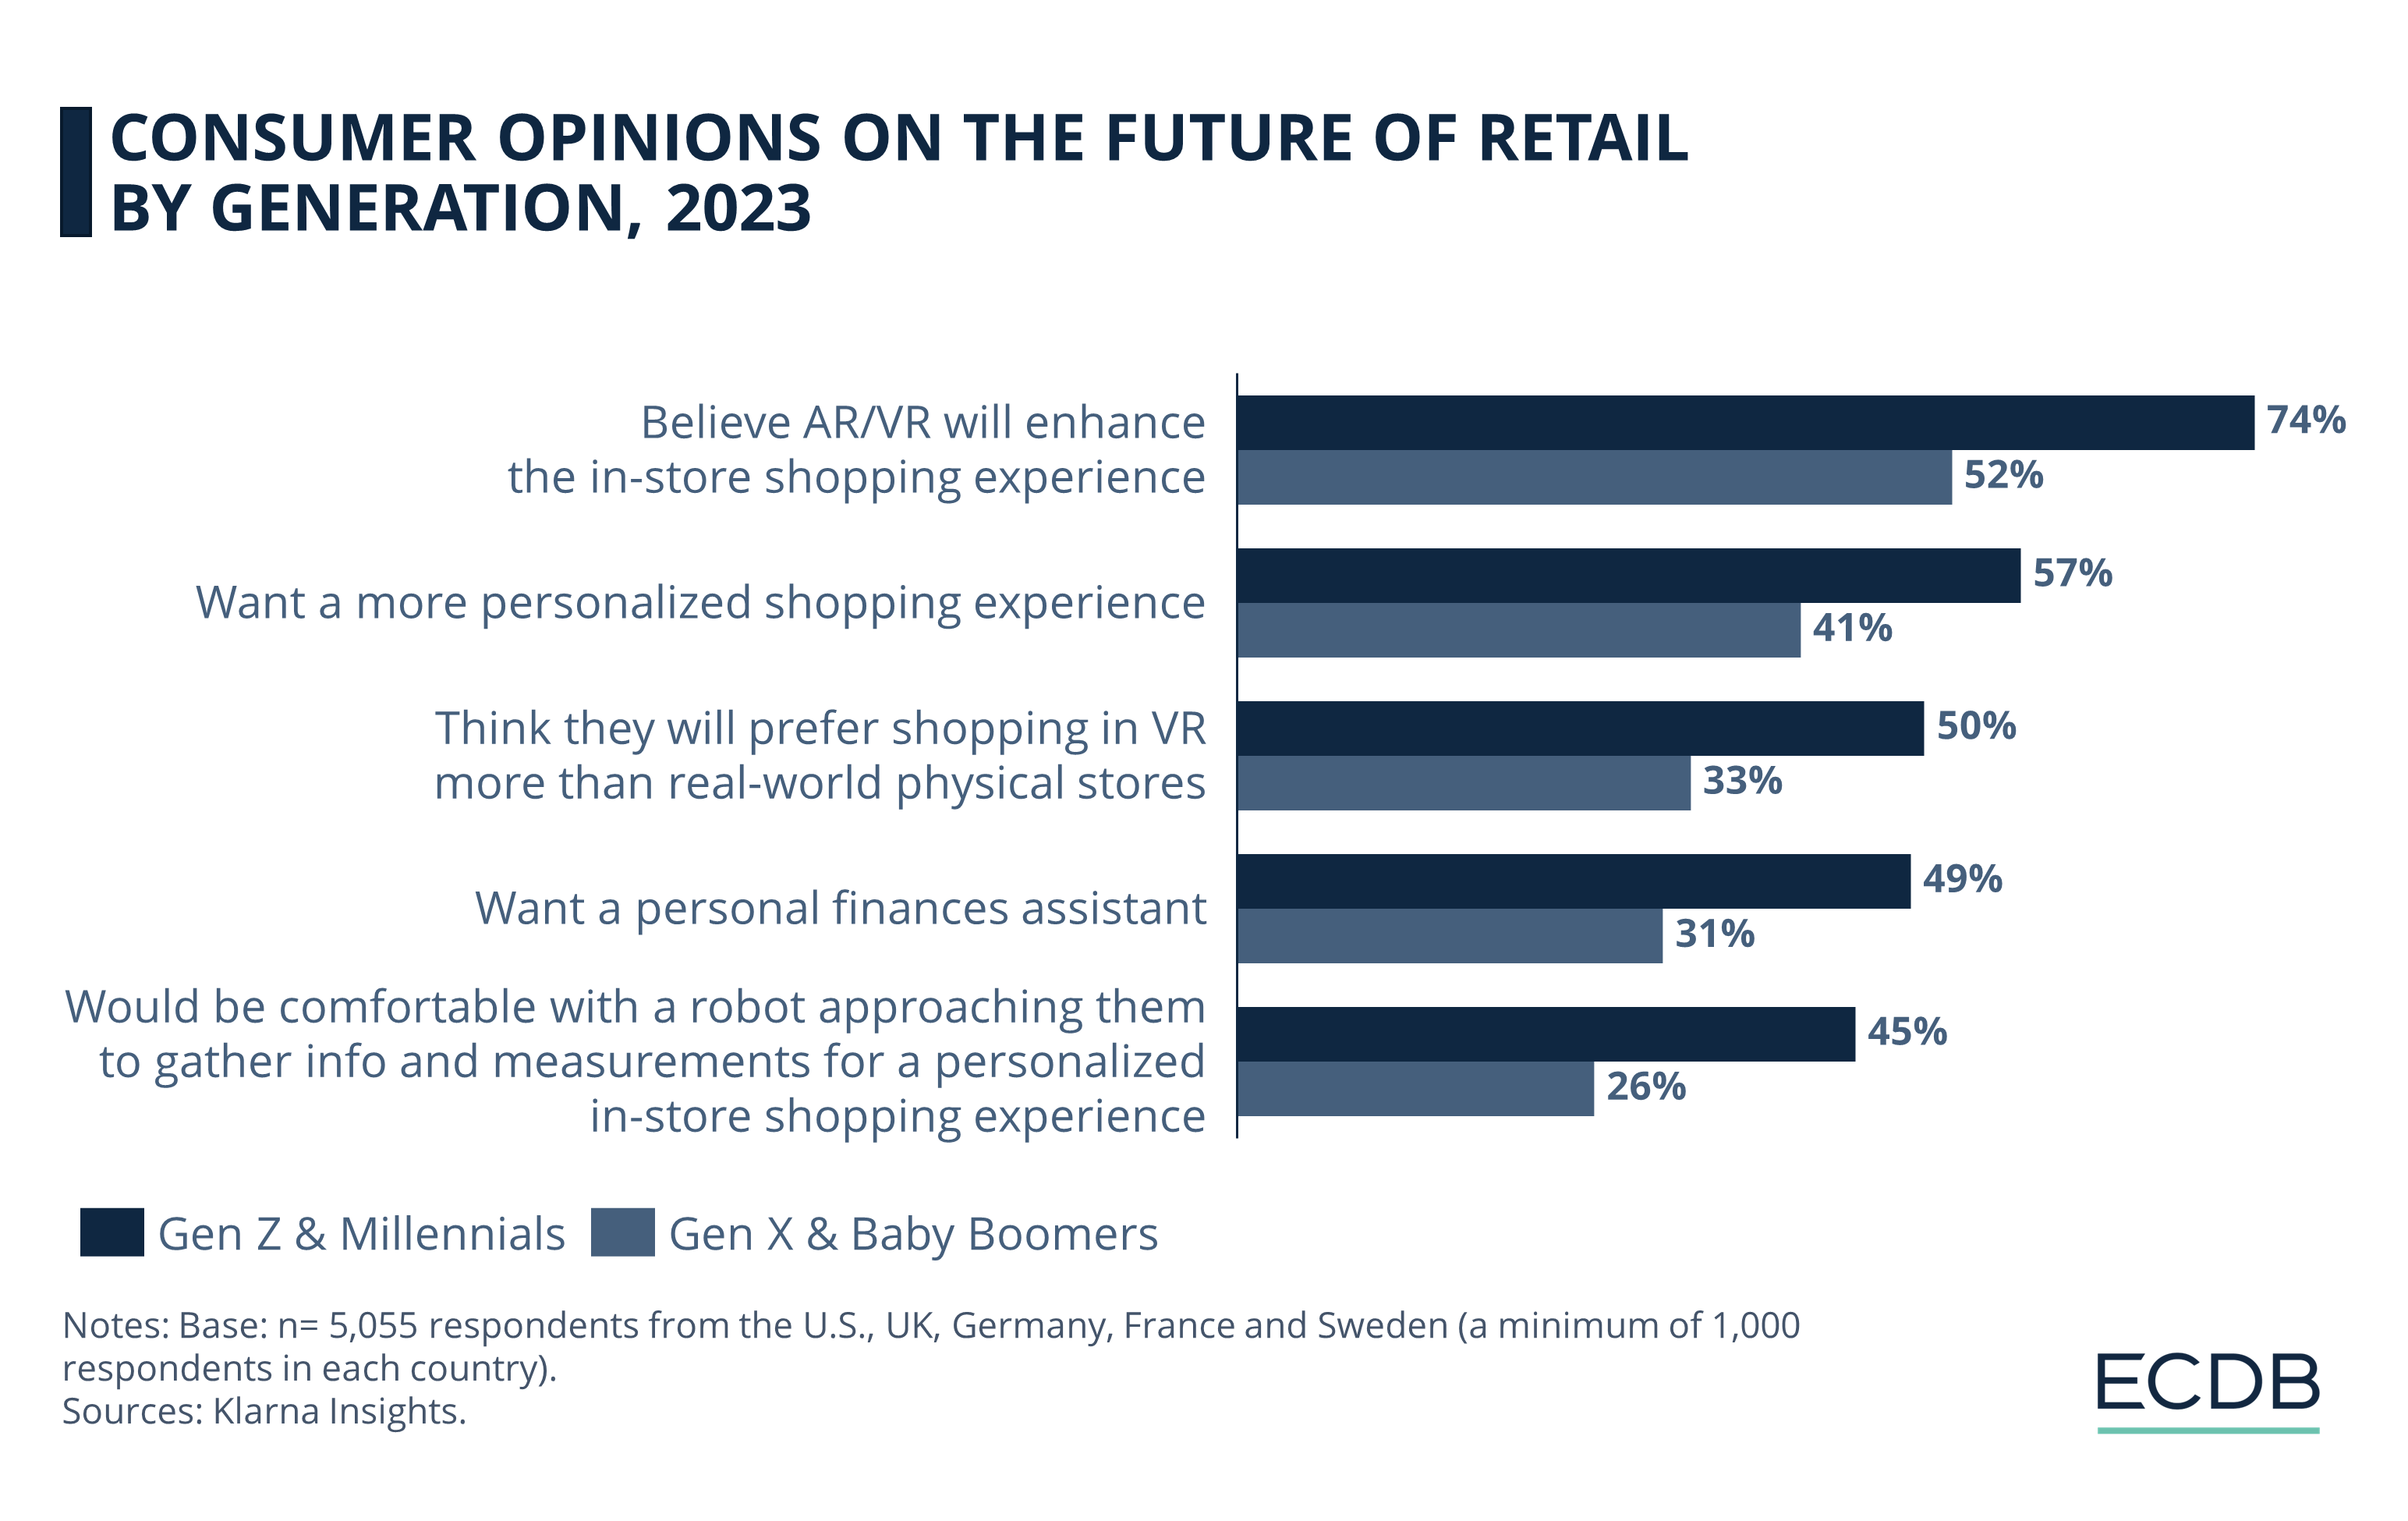 Consumer Opinions on the Future of Retail by Generation, 2023